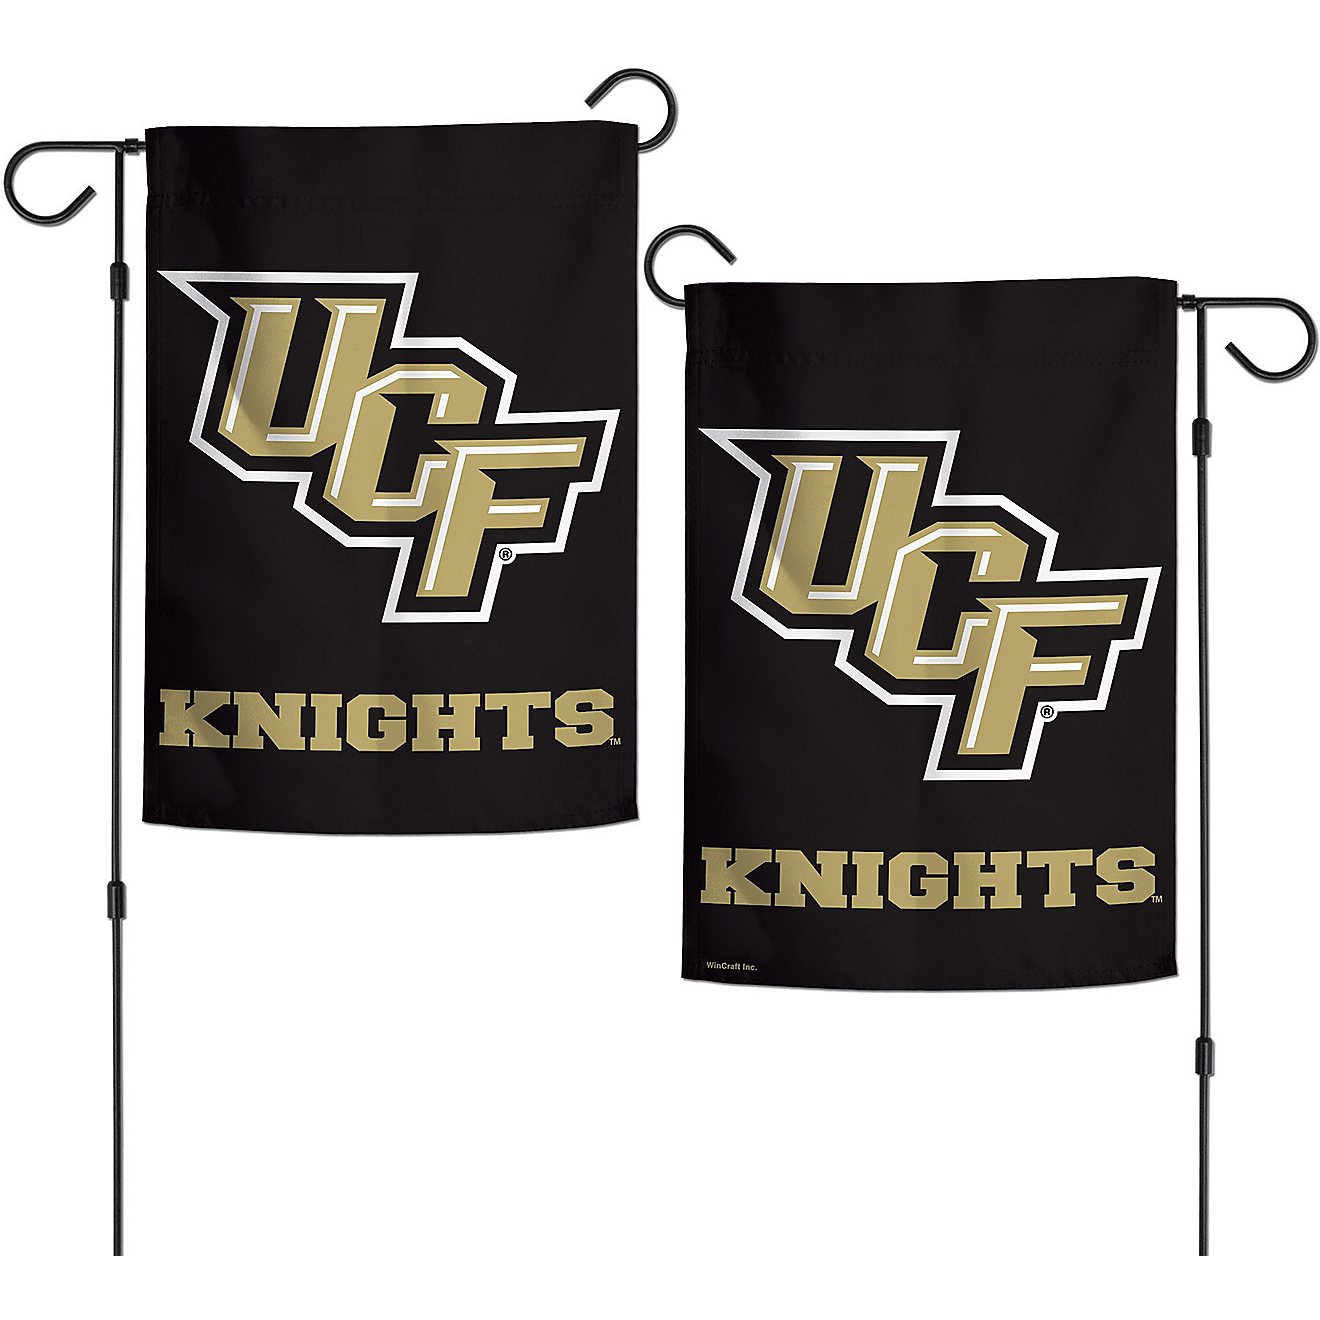 WinCraft University of Central Florida Garden Flag                                                                               - view number 1